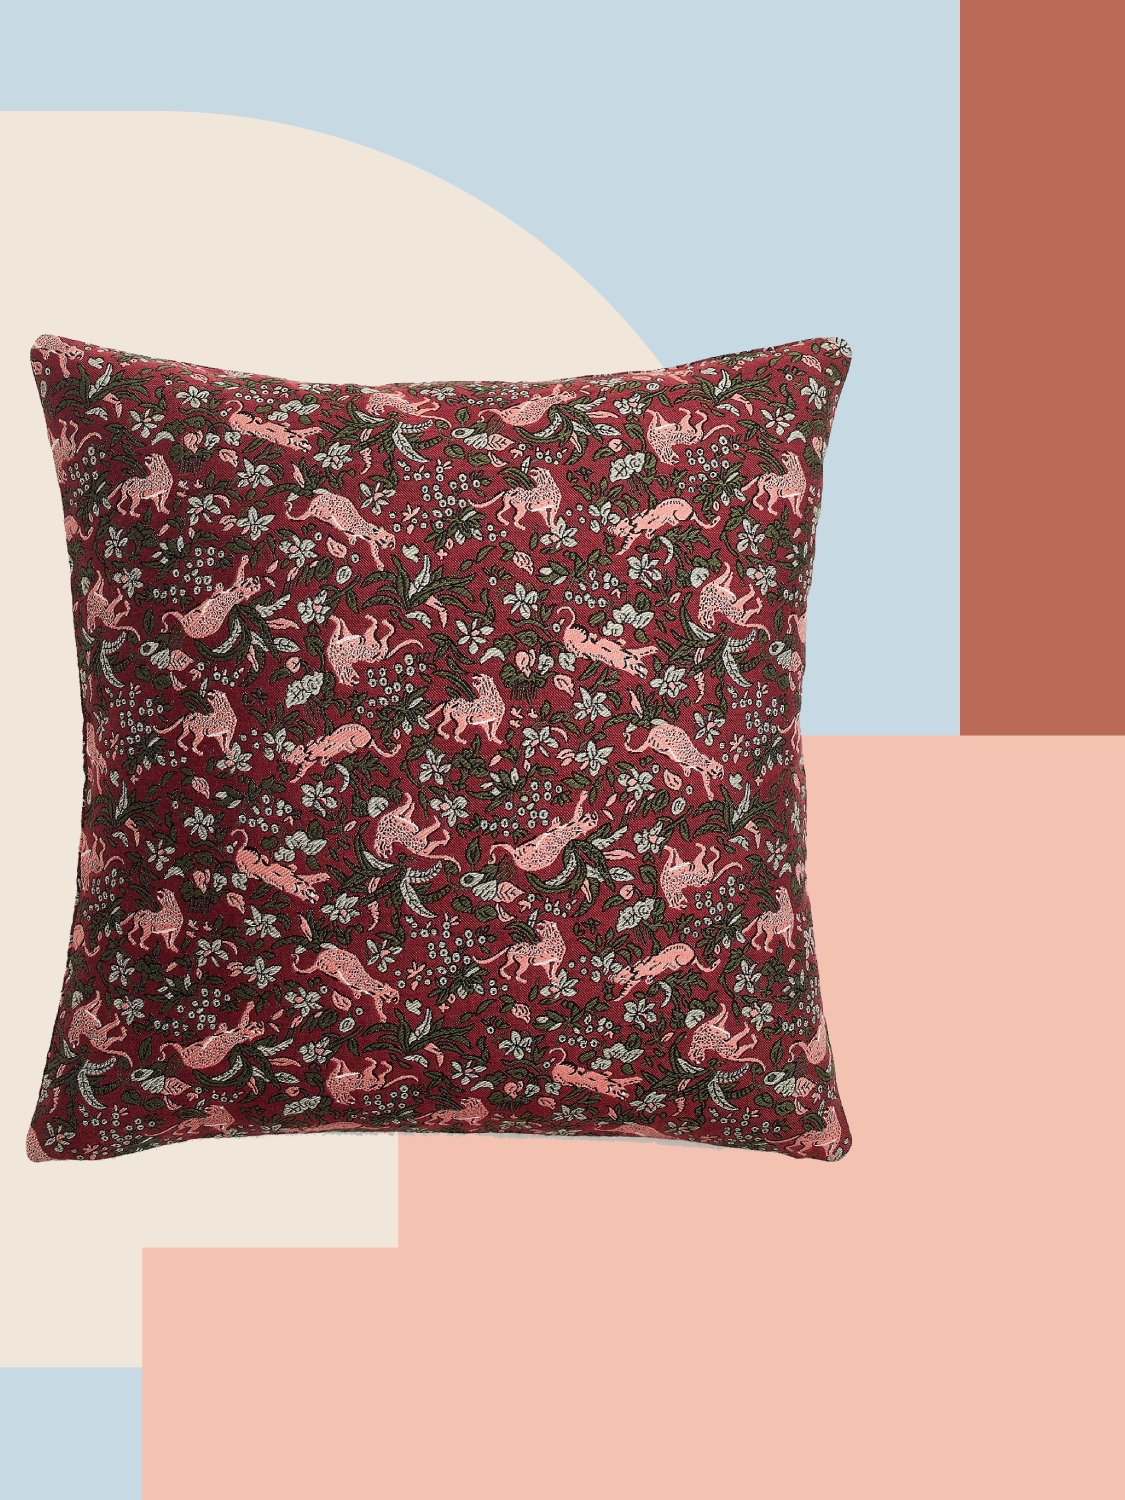 Alert: J.Crew Launched a Home Line—Shop the 11 Best Buys